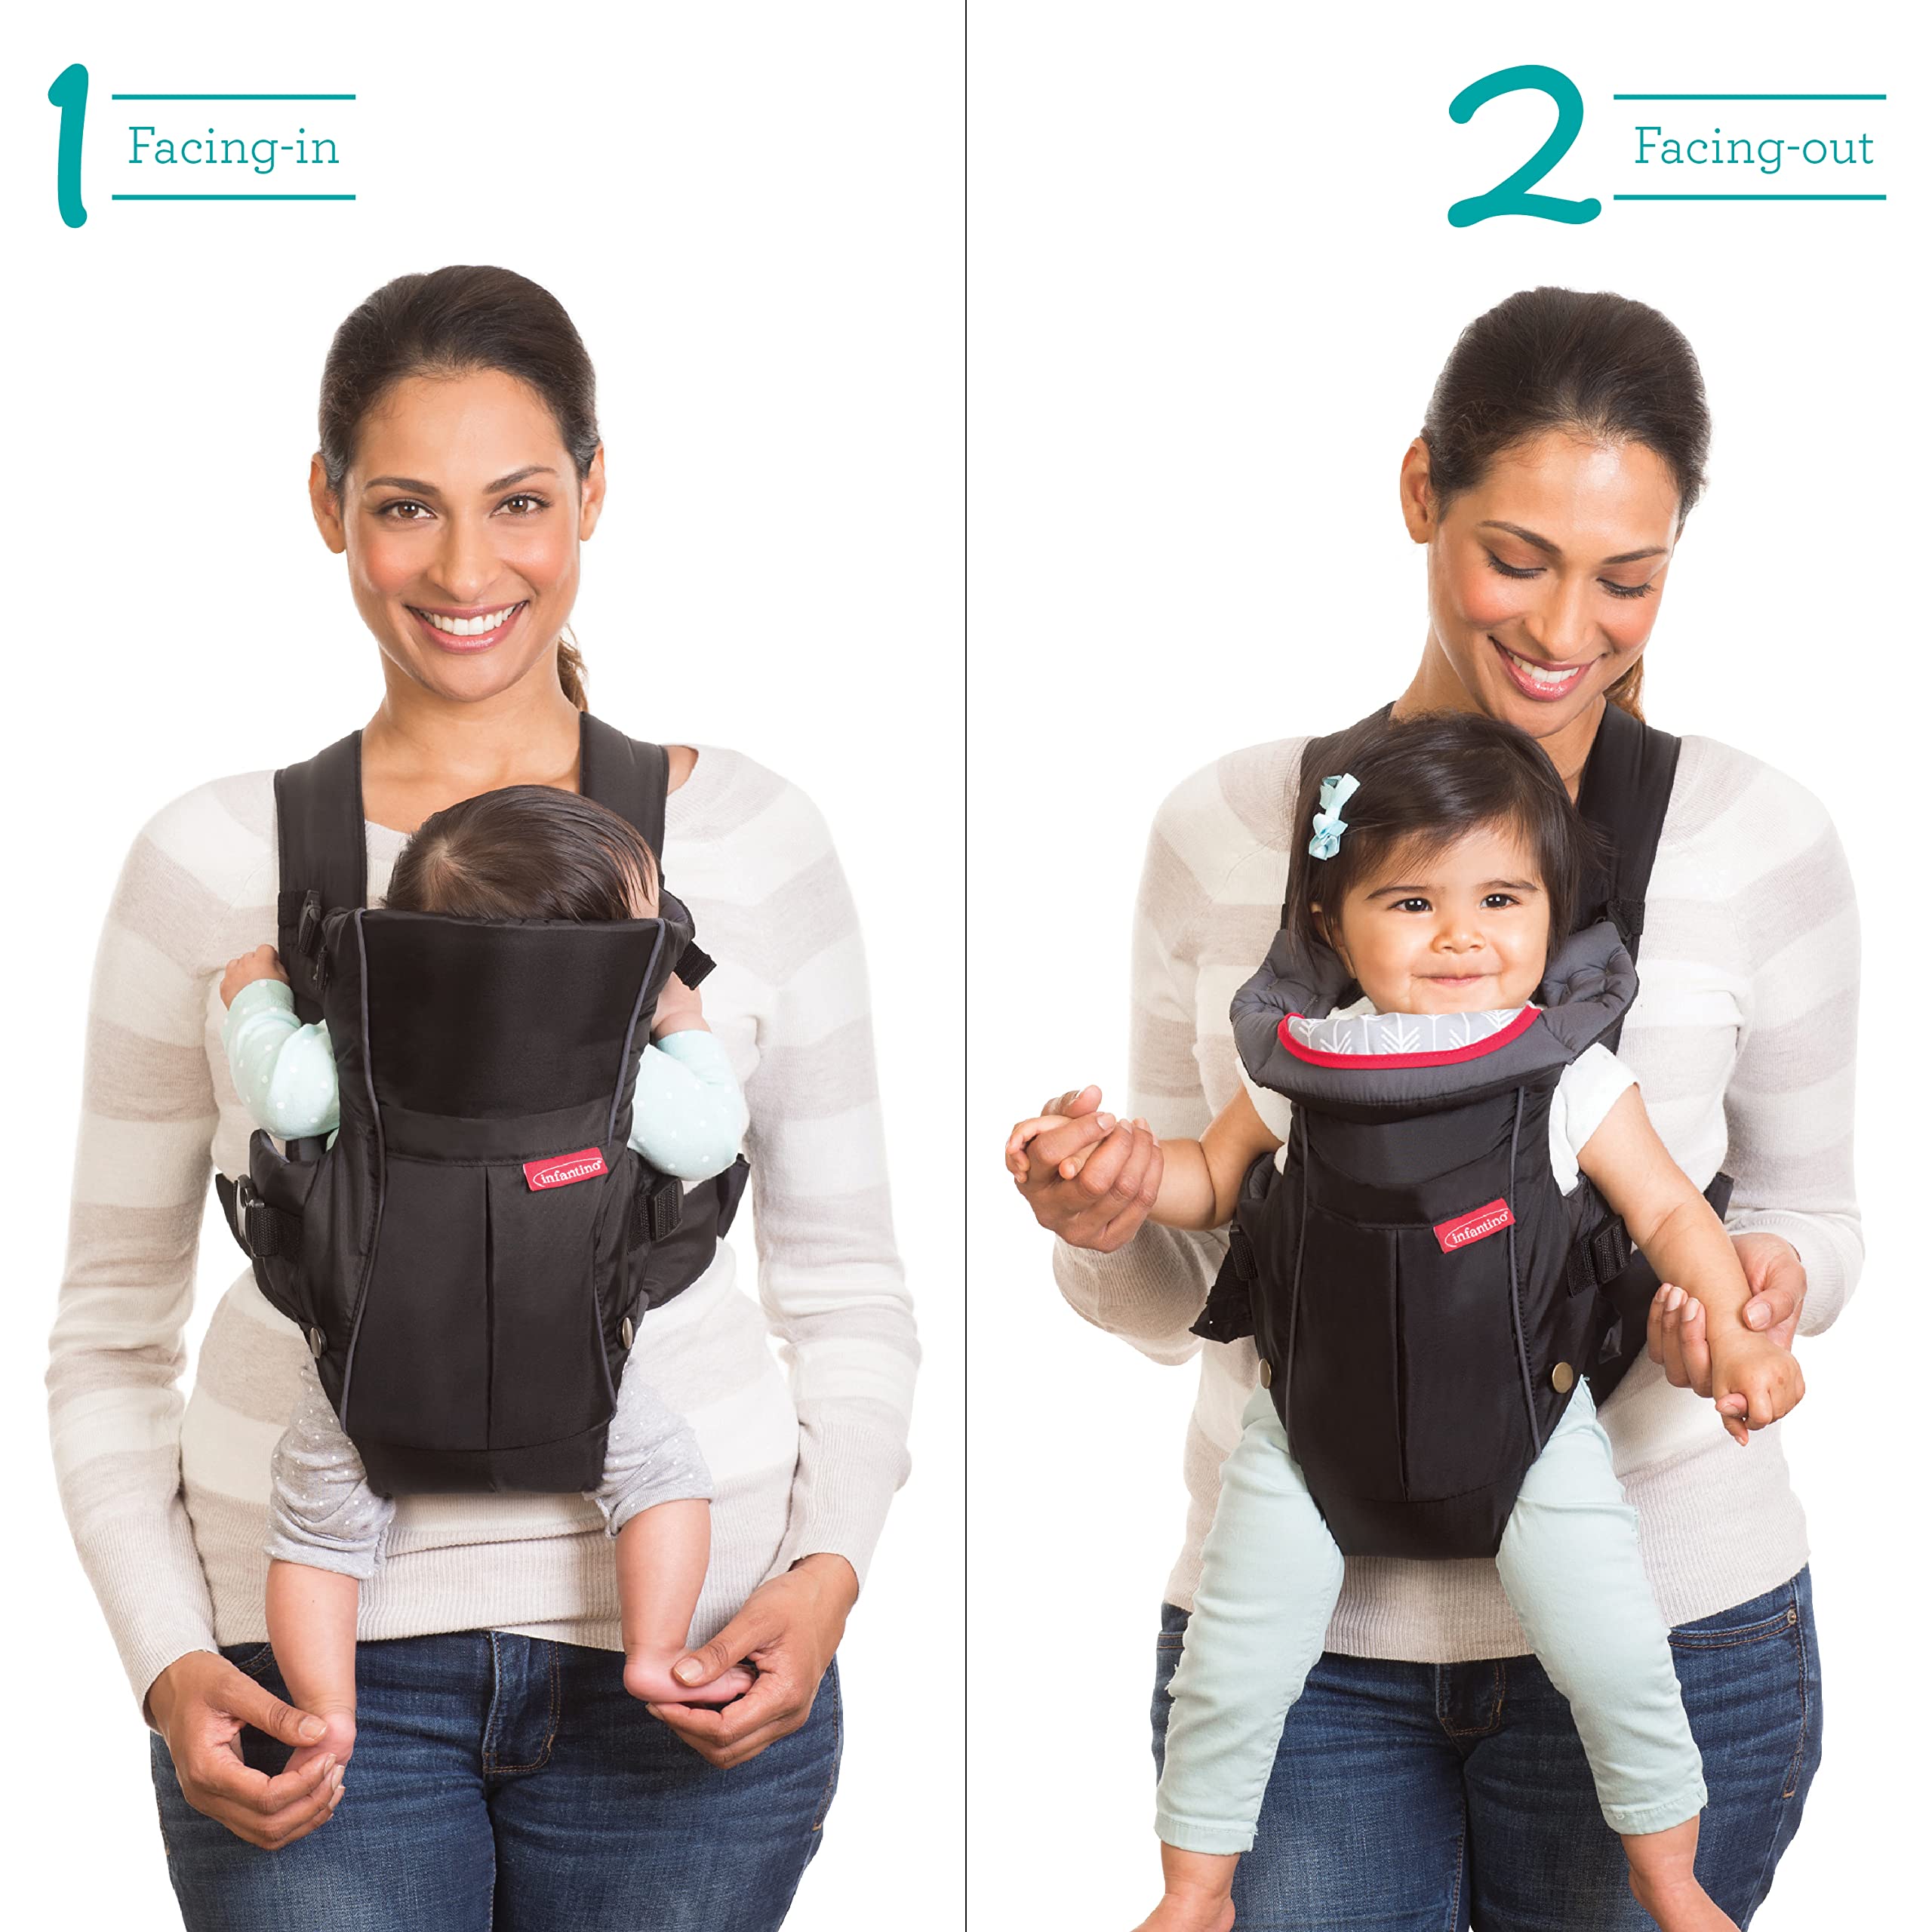 Infantino Swift Classic Carrier with Pocket - 2 Ways to Carry Black Carrier with Wonder Bib & Essentials Storage Front Pocket, Adjustable Back Strap, 1-Piece